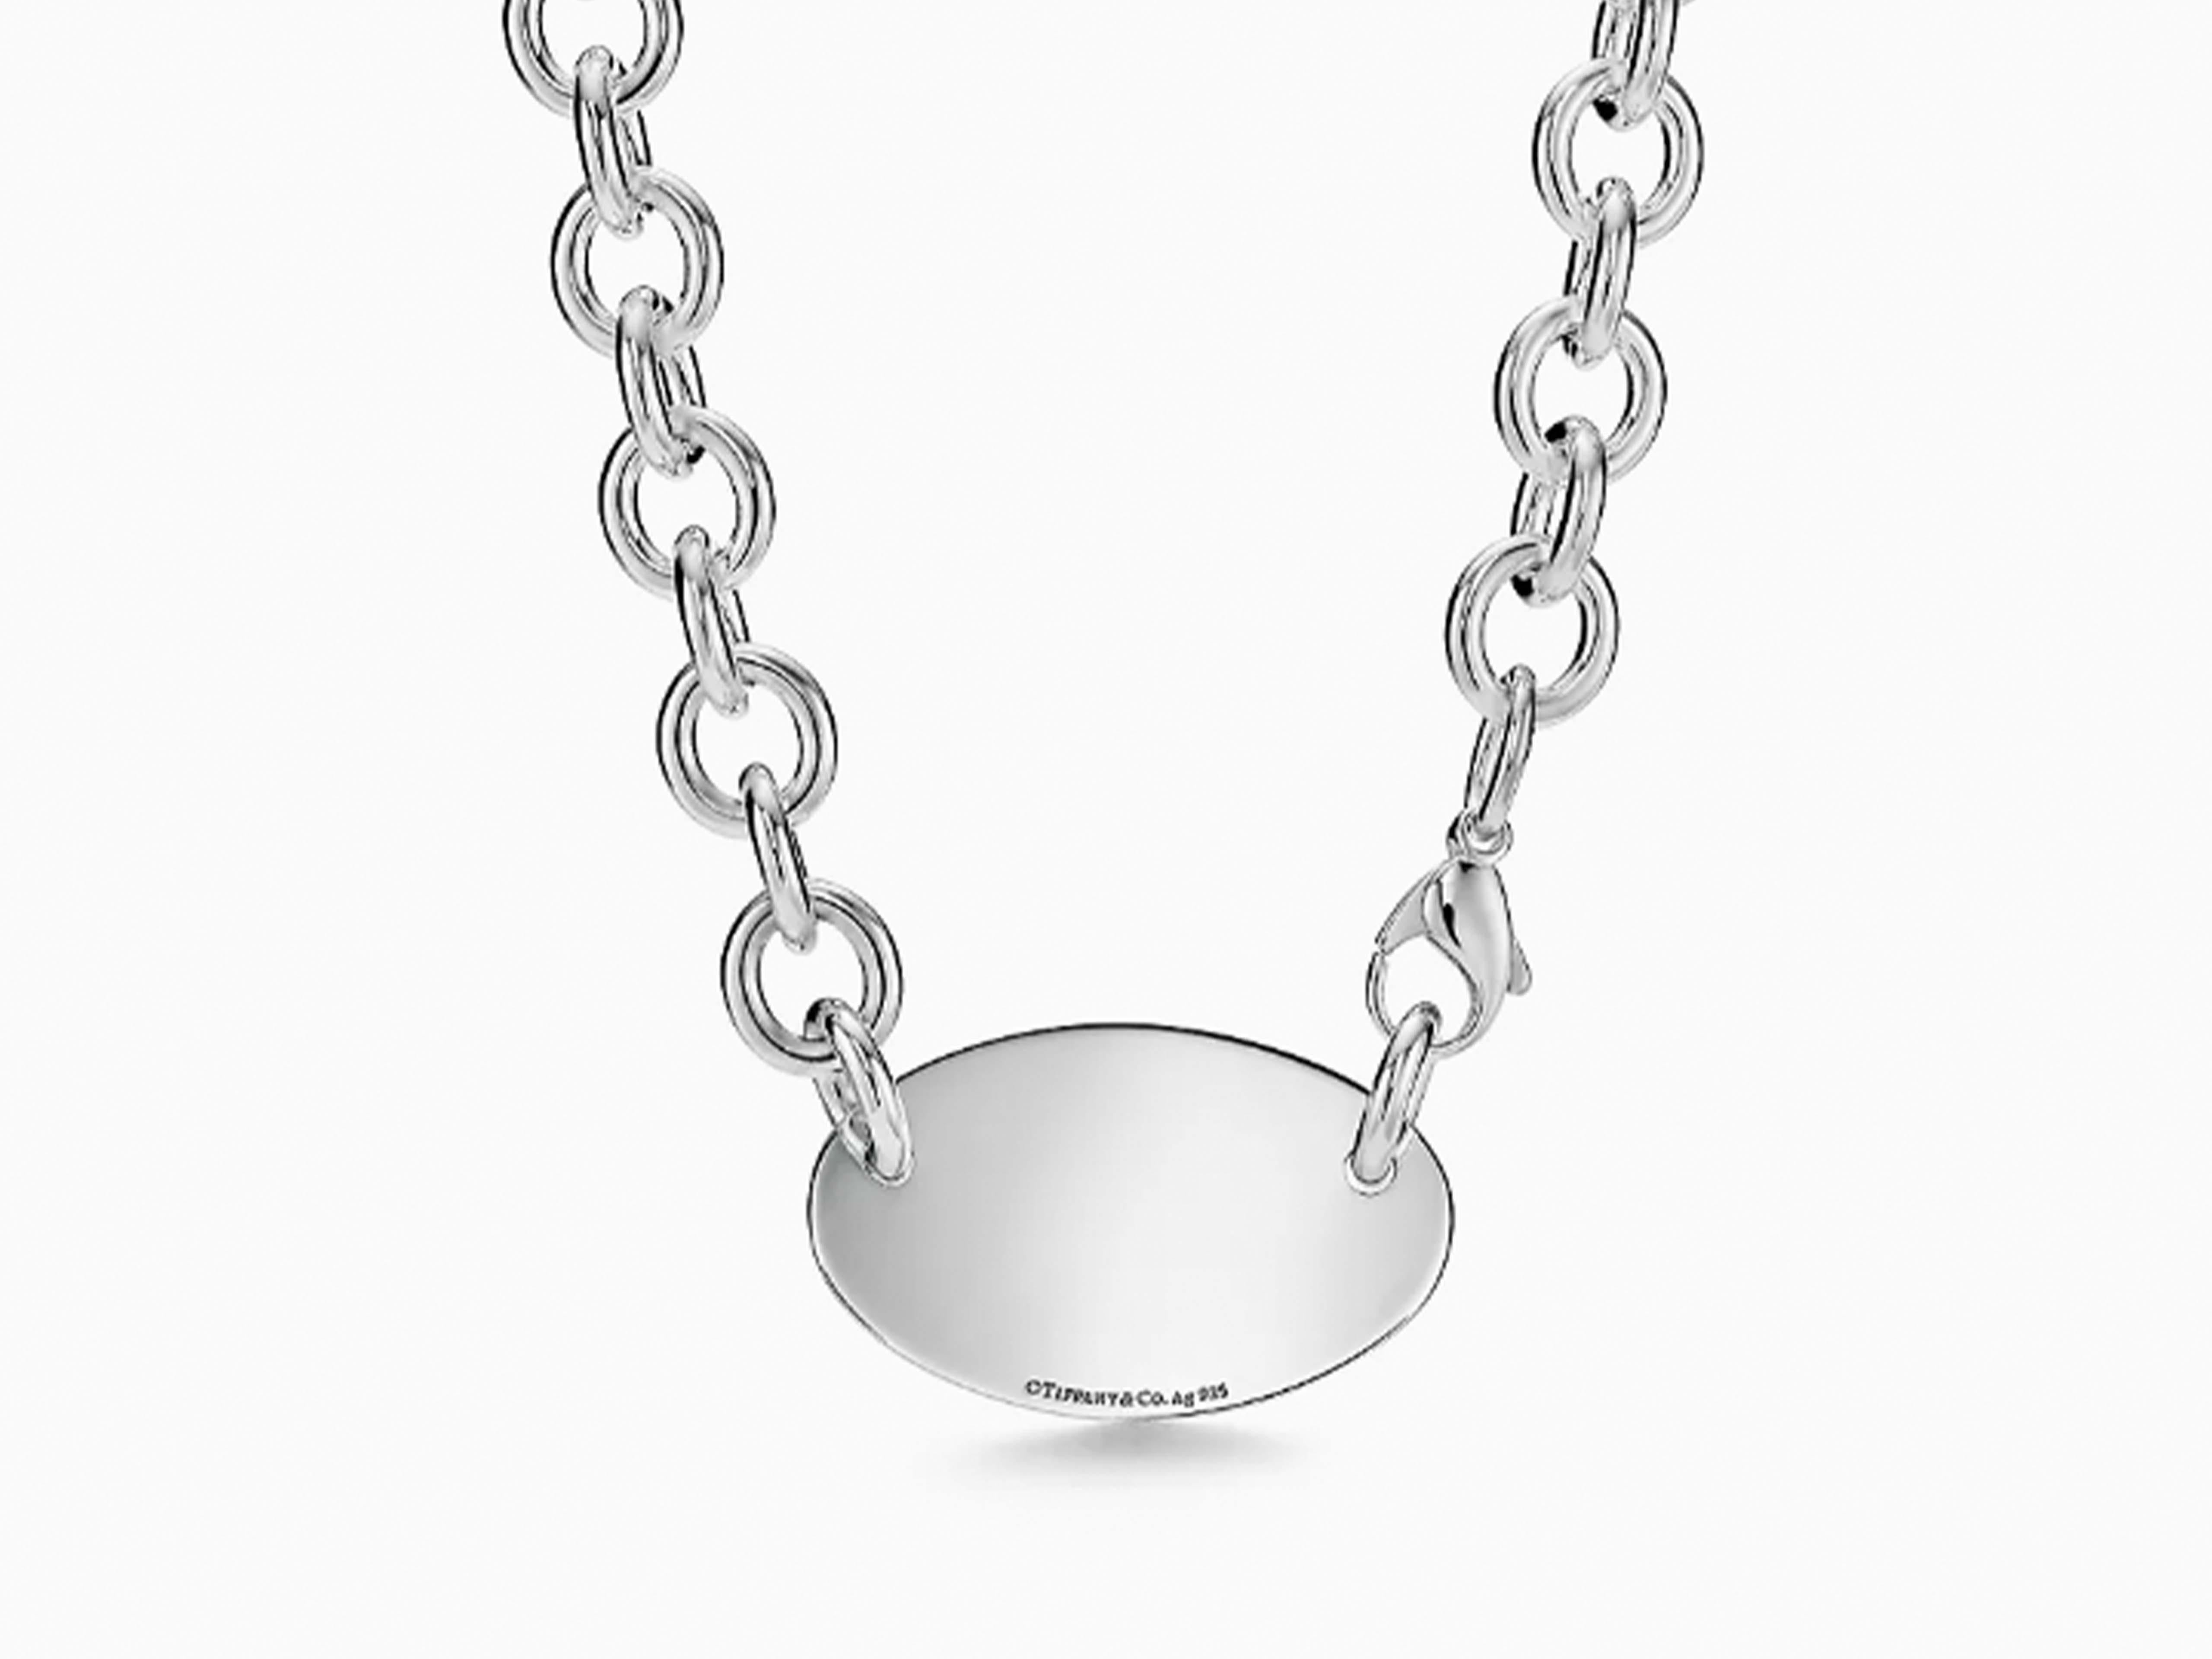 Necklace Specifications:

Brand: Tiffany & Co.

Metal: Sterling Silver, AG 925

Chain Length: ~15